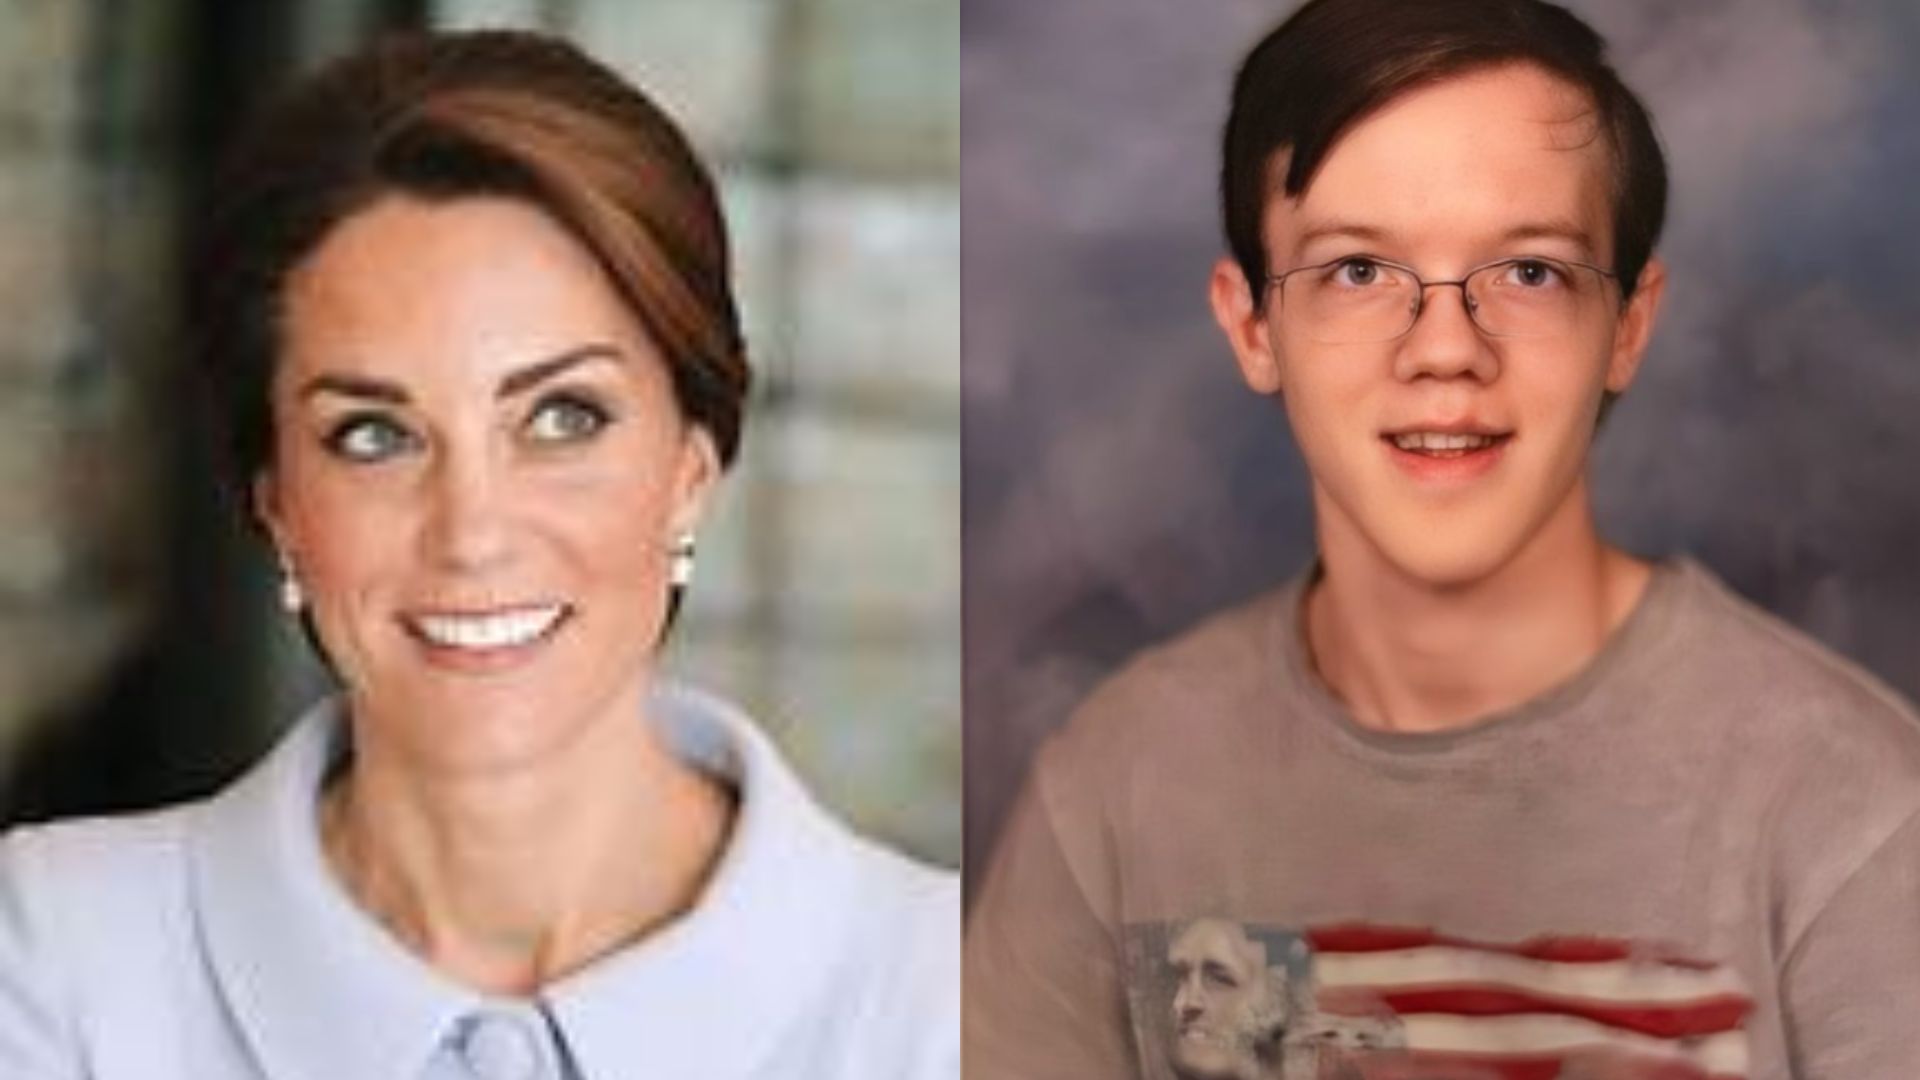 Trump Shooter Thomas Matthew ‘Searched For Picture of Kate Middleton’: Report